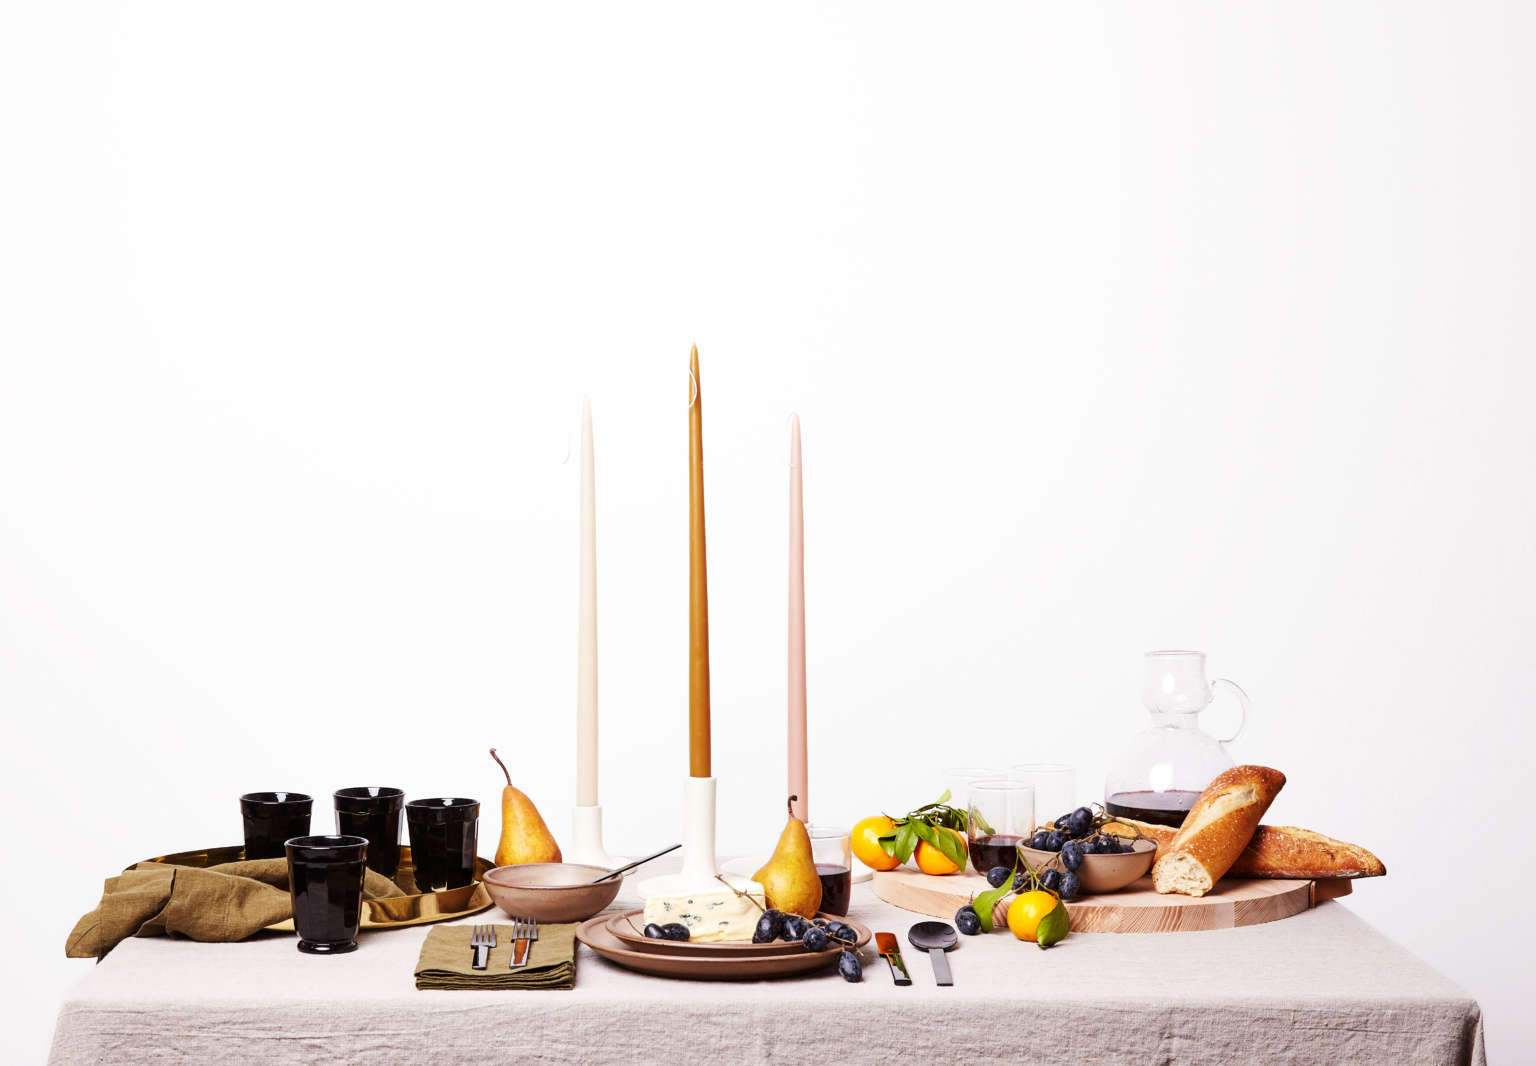 Enter to Win A Festive Holiday Tablescape Worth 1500 Curated by the Editors of Remodelista portrait 3